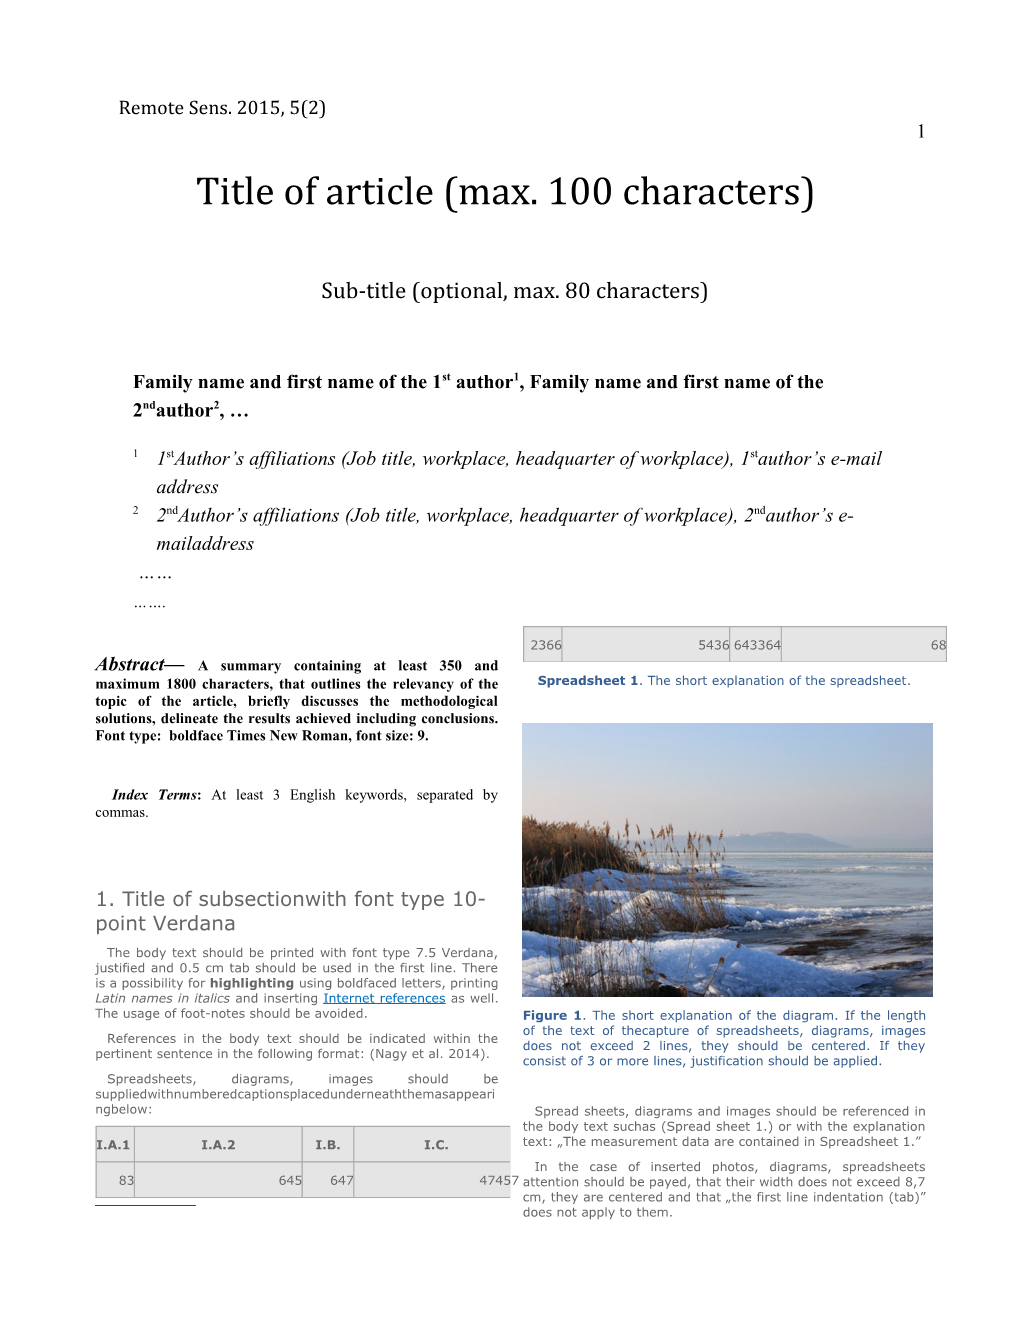 Title of Article (Max. 100 Characters)